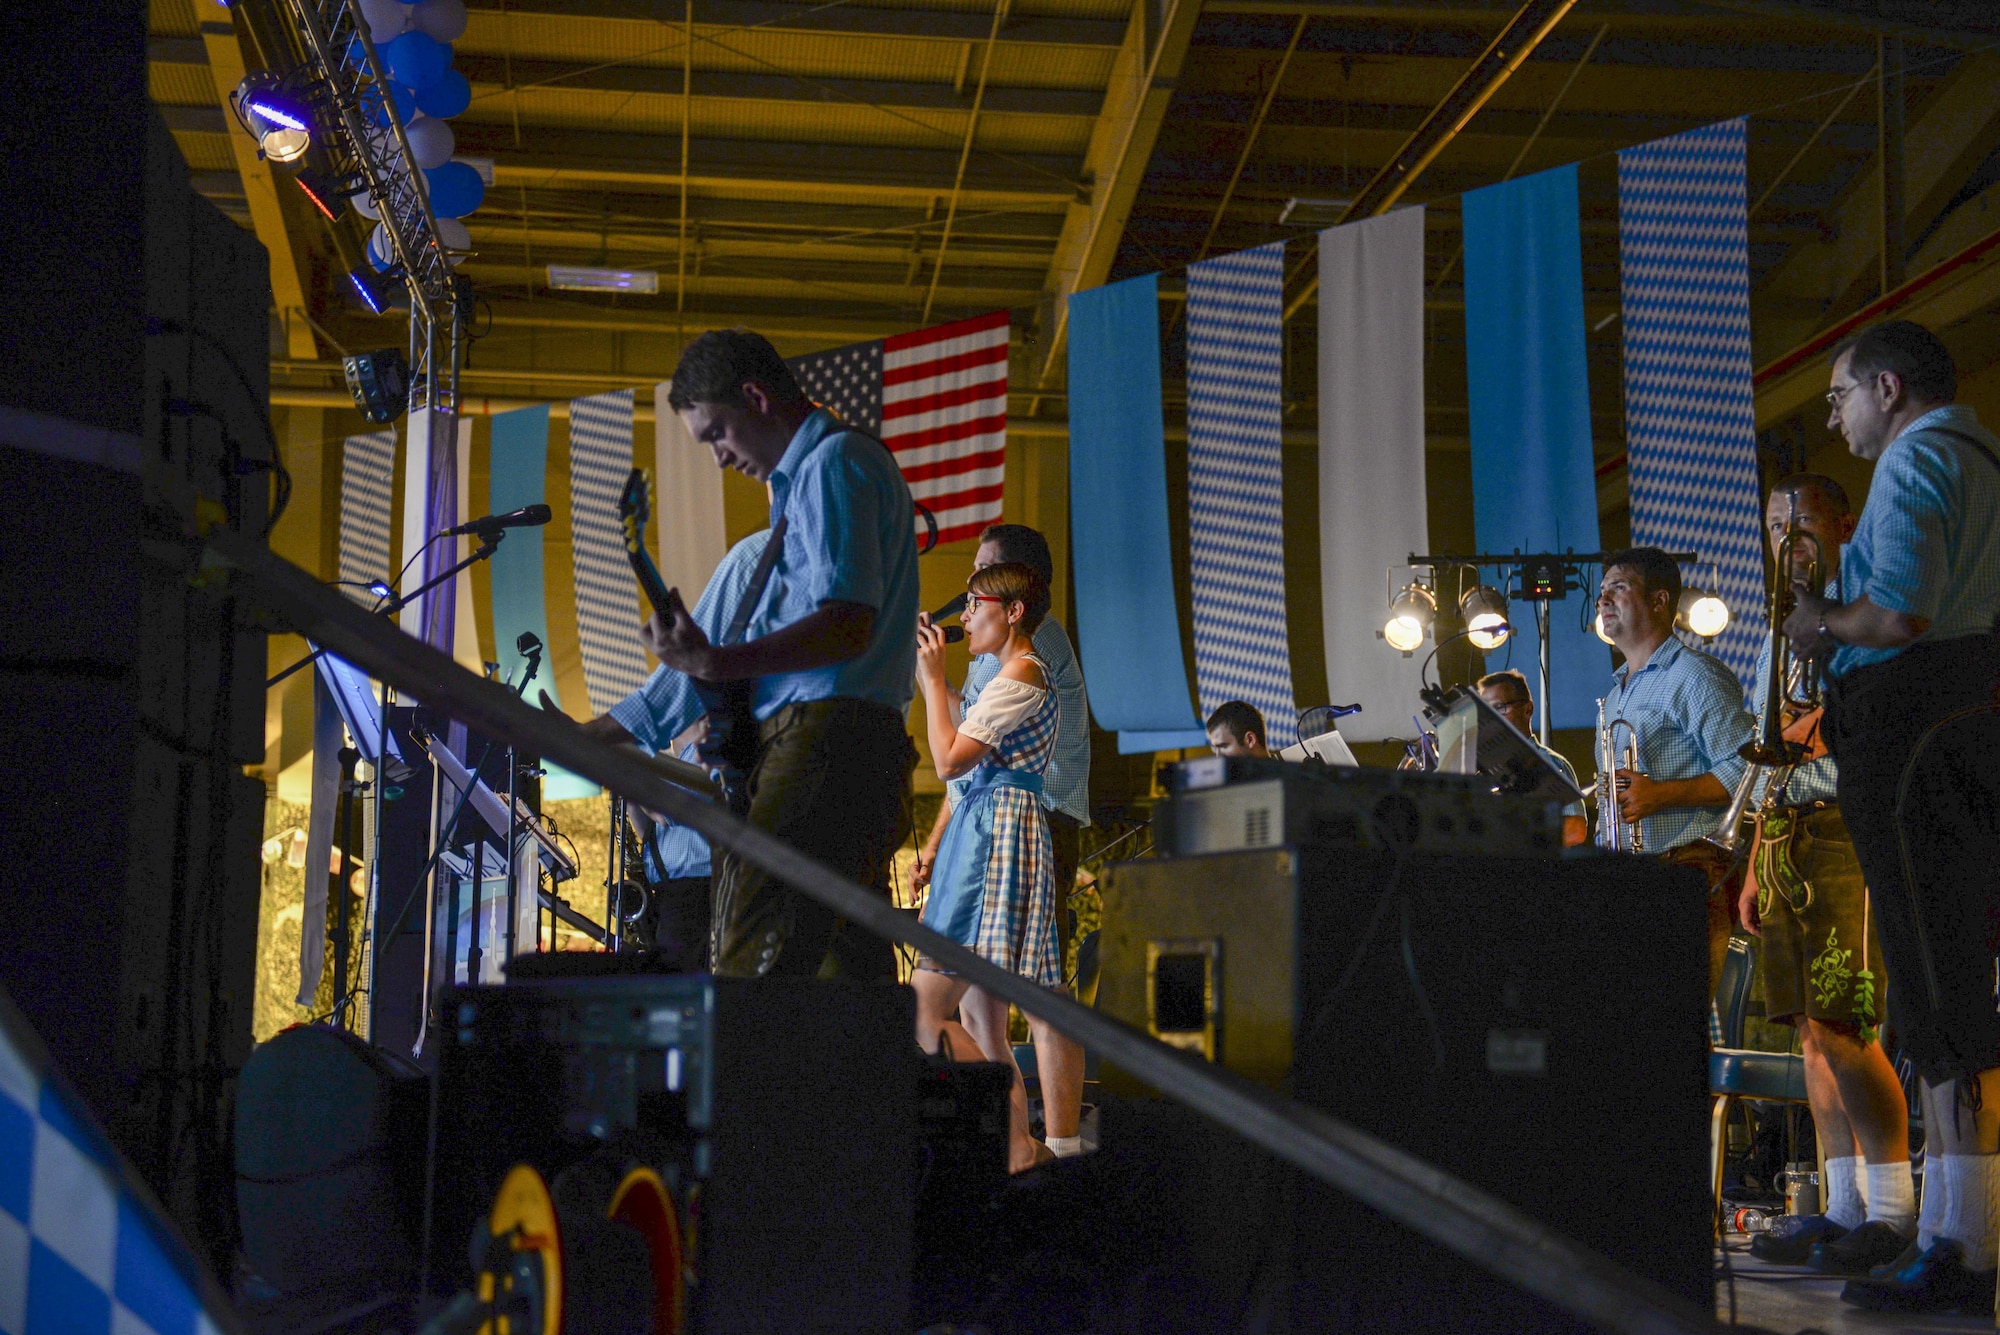 Bavarian musicians play traditional folk music at the 20th annual Oktoberfest at Holloman Air Force Base, N.M. on Sept. 10, 2016. The German air force hosts Oktoberfest each year, flying in authentic Bavarian foods and beer. (U.S. Air Force photo by Airman Alexis P. Docherty) 